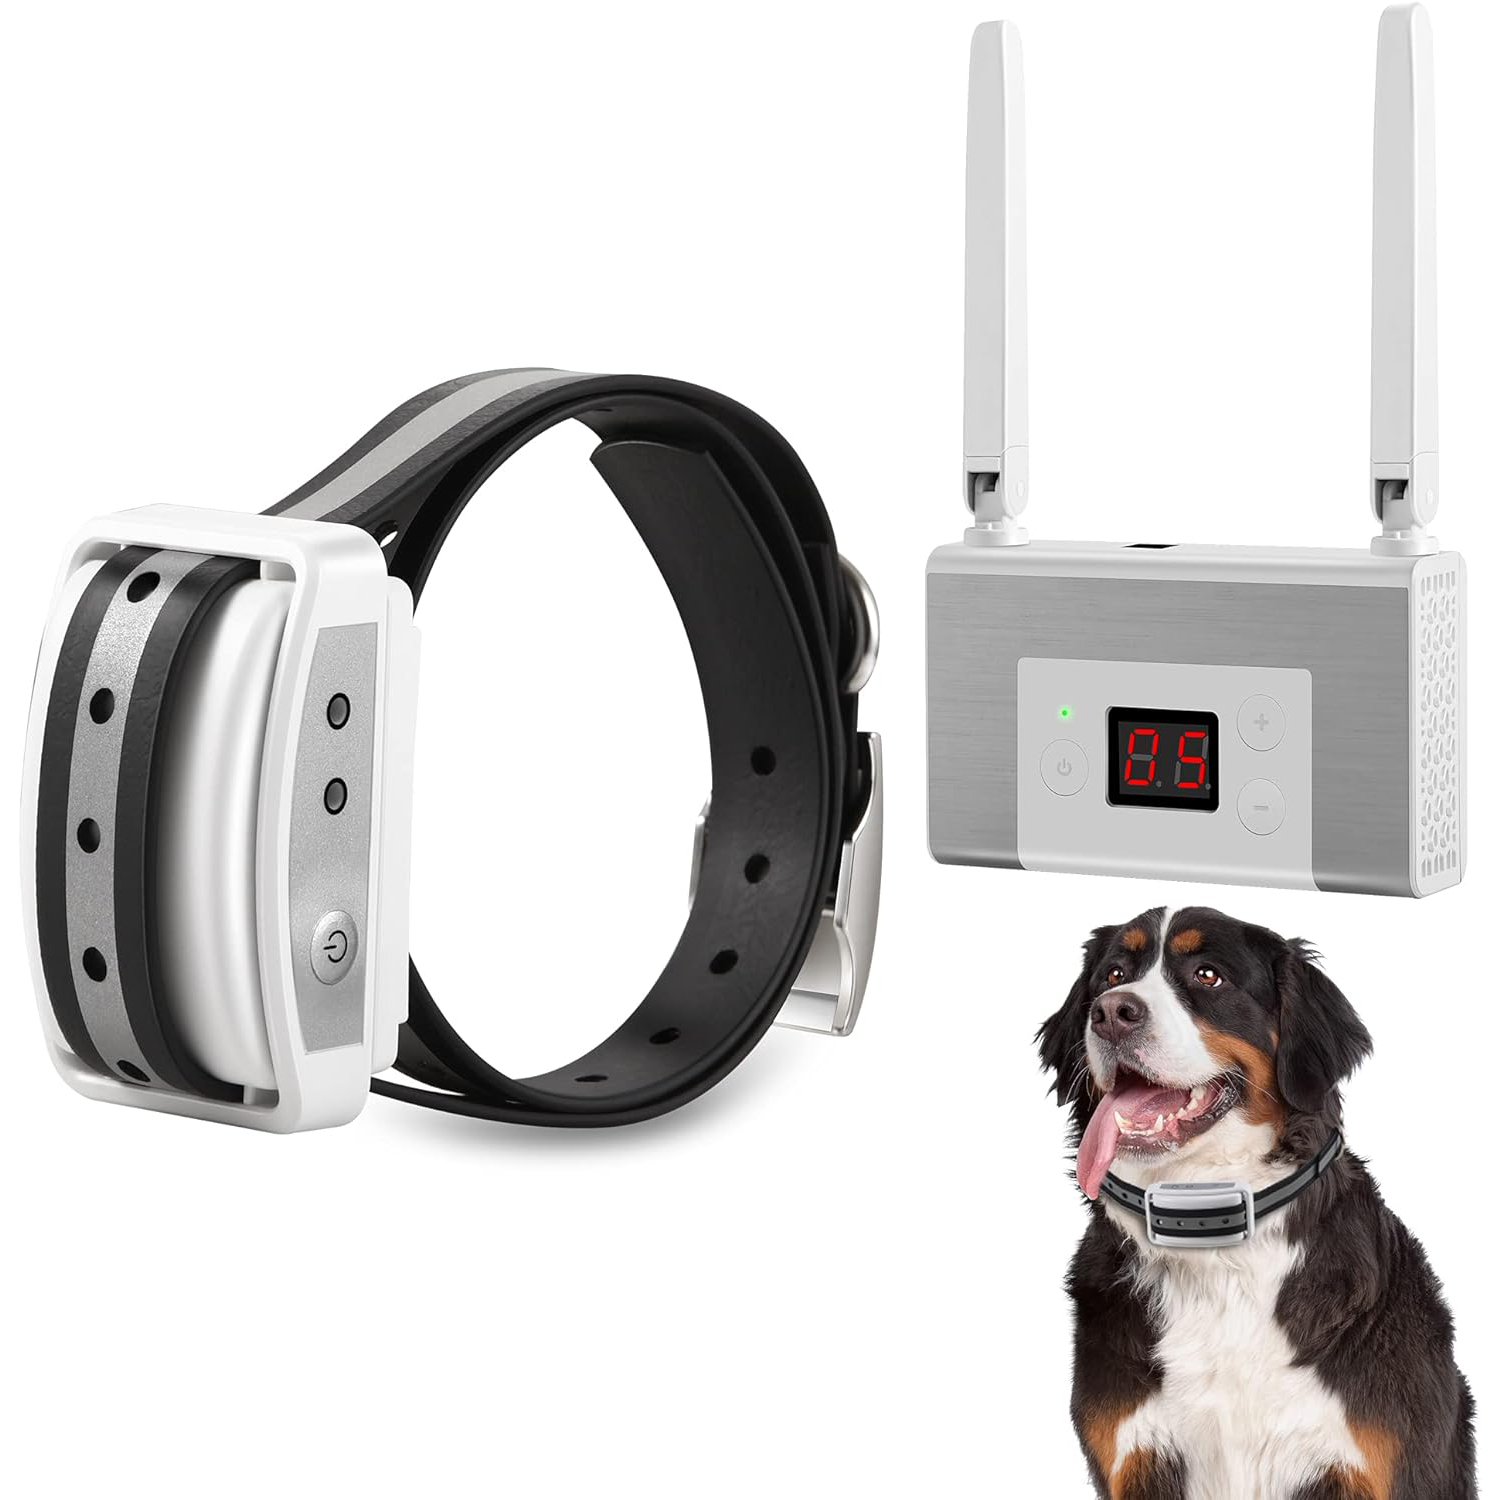 Electric Wireless Dog Fence System, Pet Containment System for Dogs and Pets with Waterproof and Rechargeable Collar Receiver for one Dog Container Boundary System